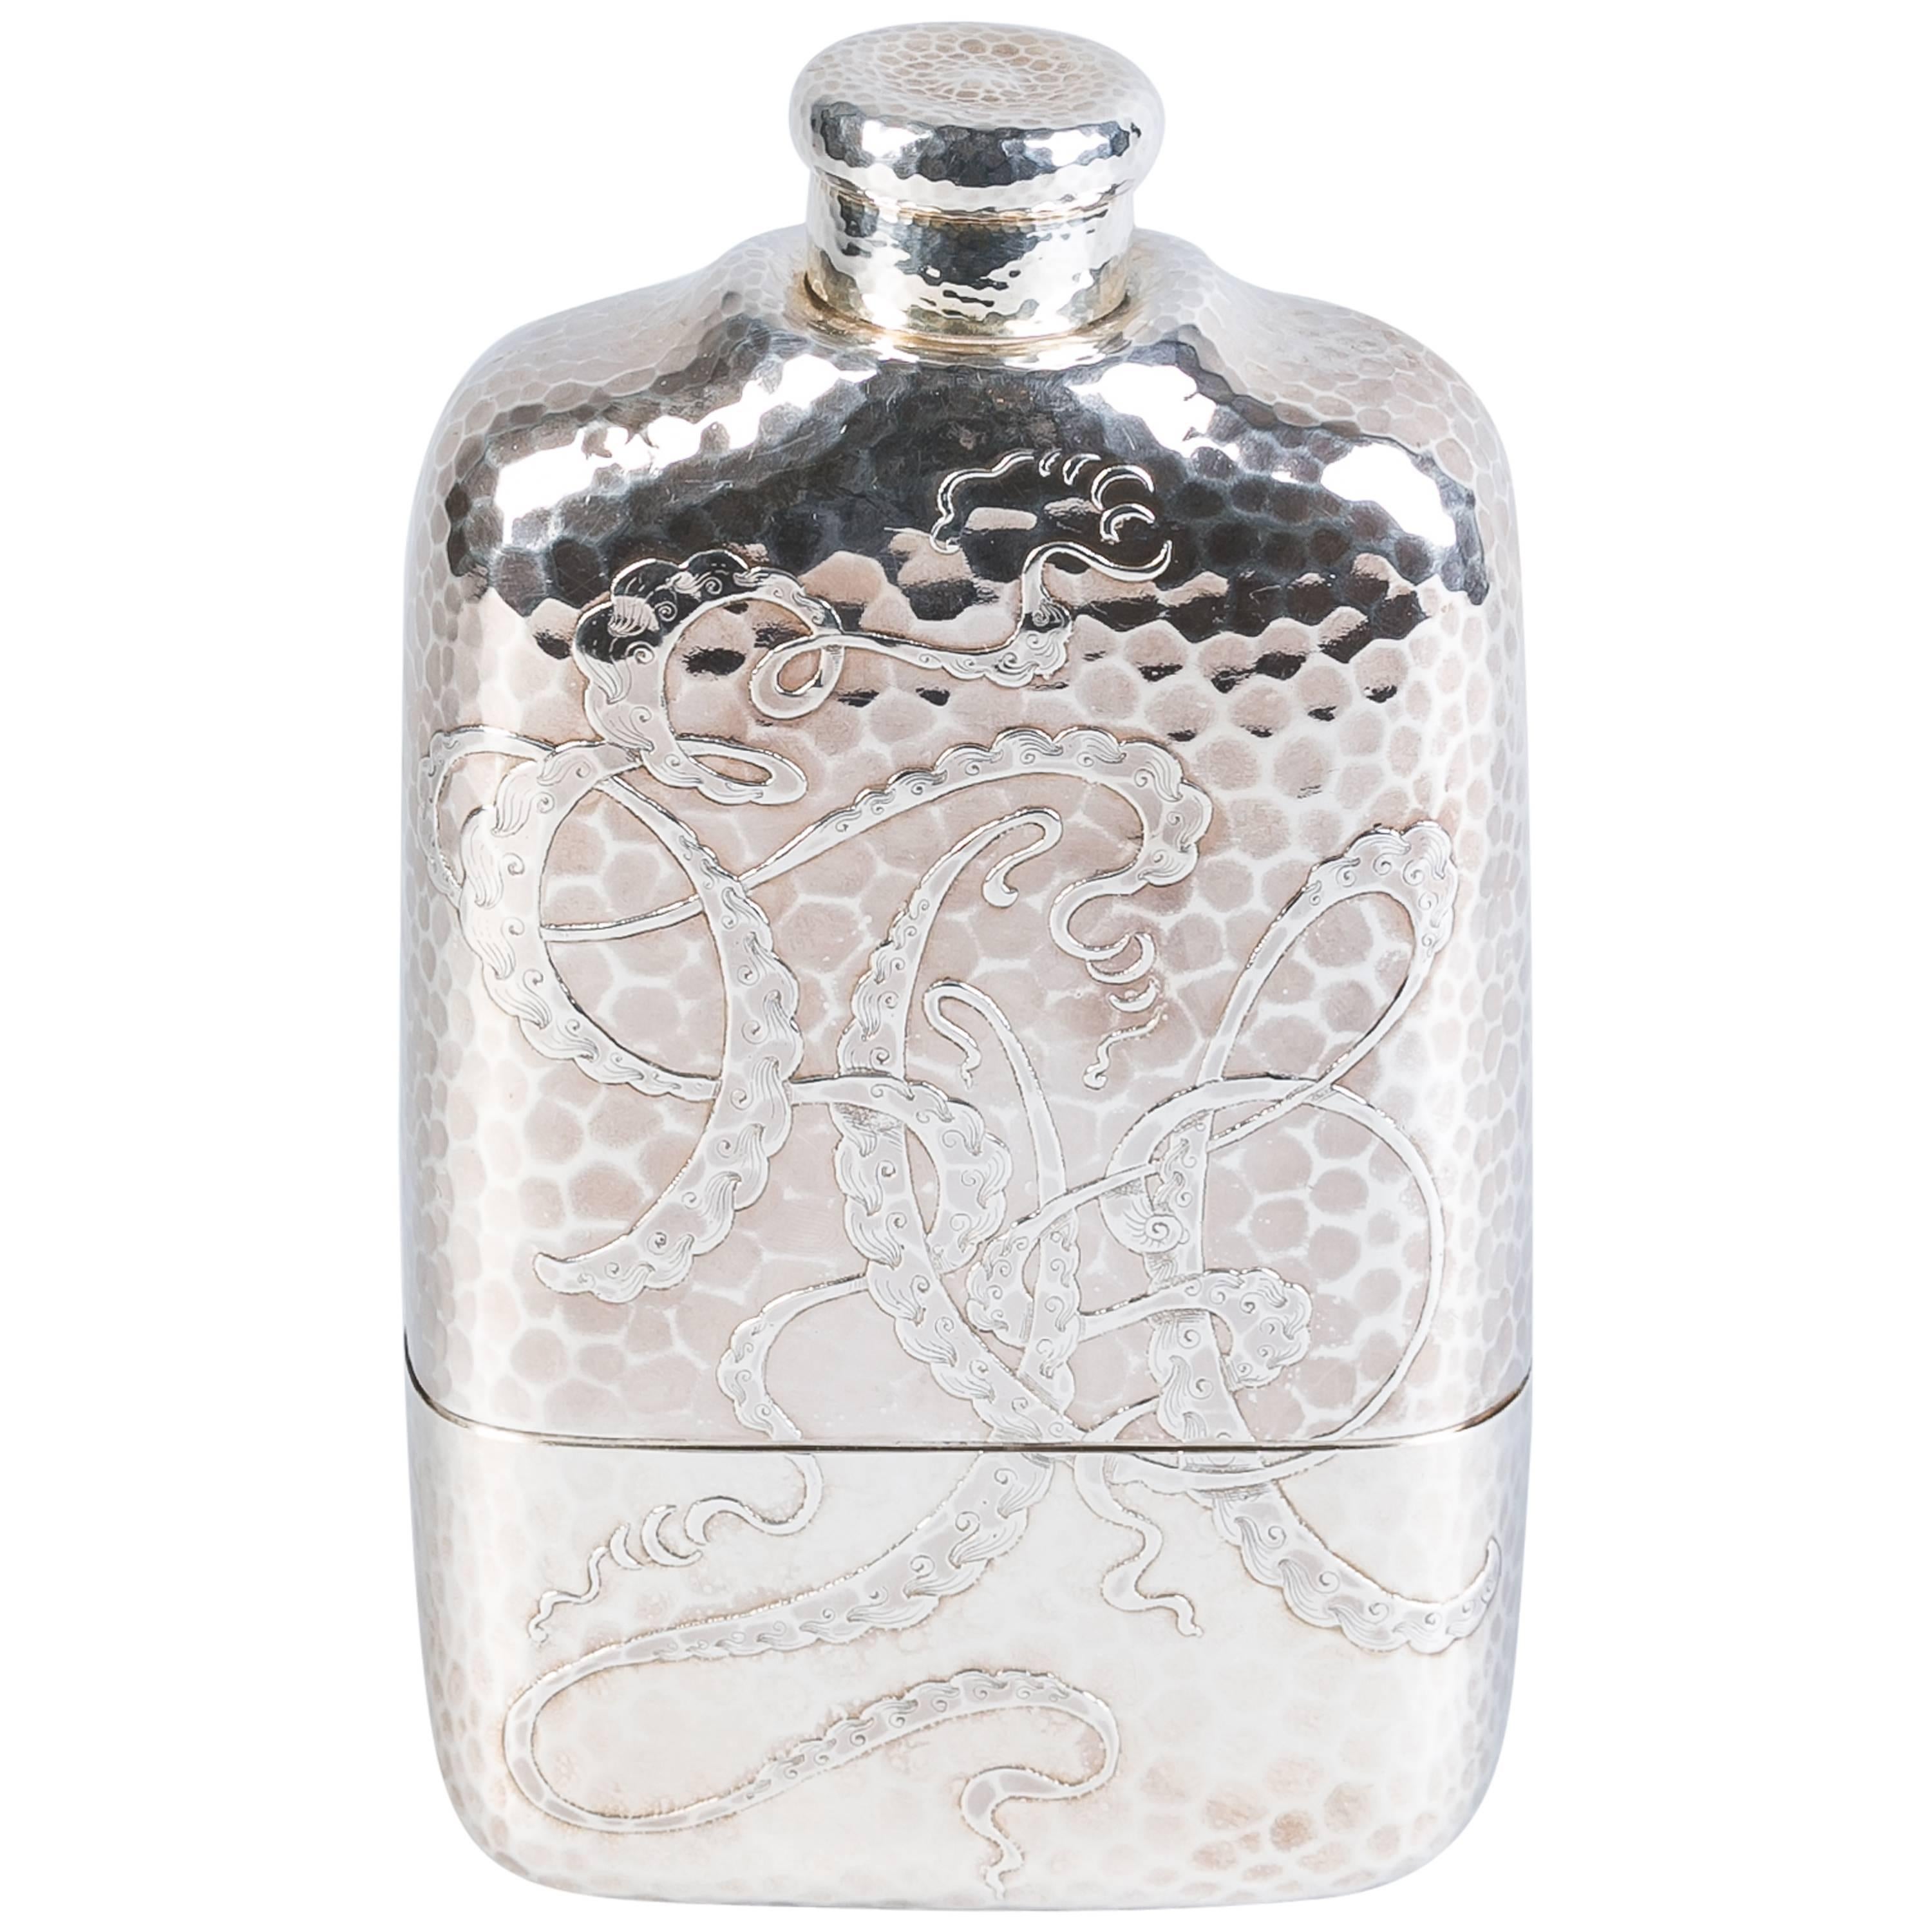 Tiffany and Co. Sterling Silver Flask, 1883-1891